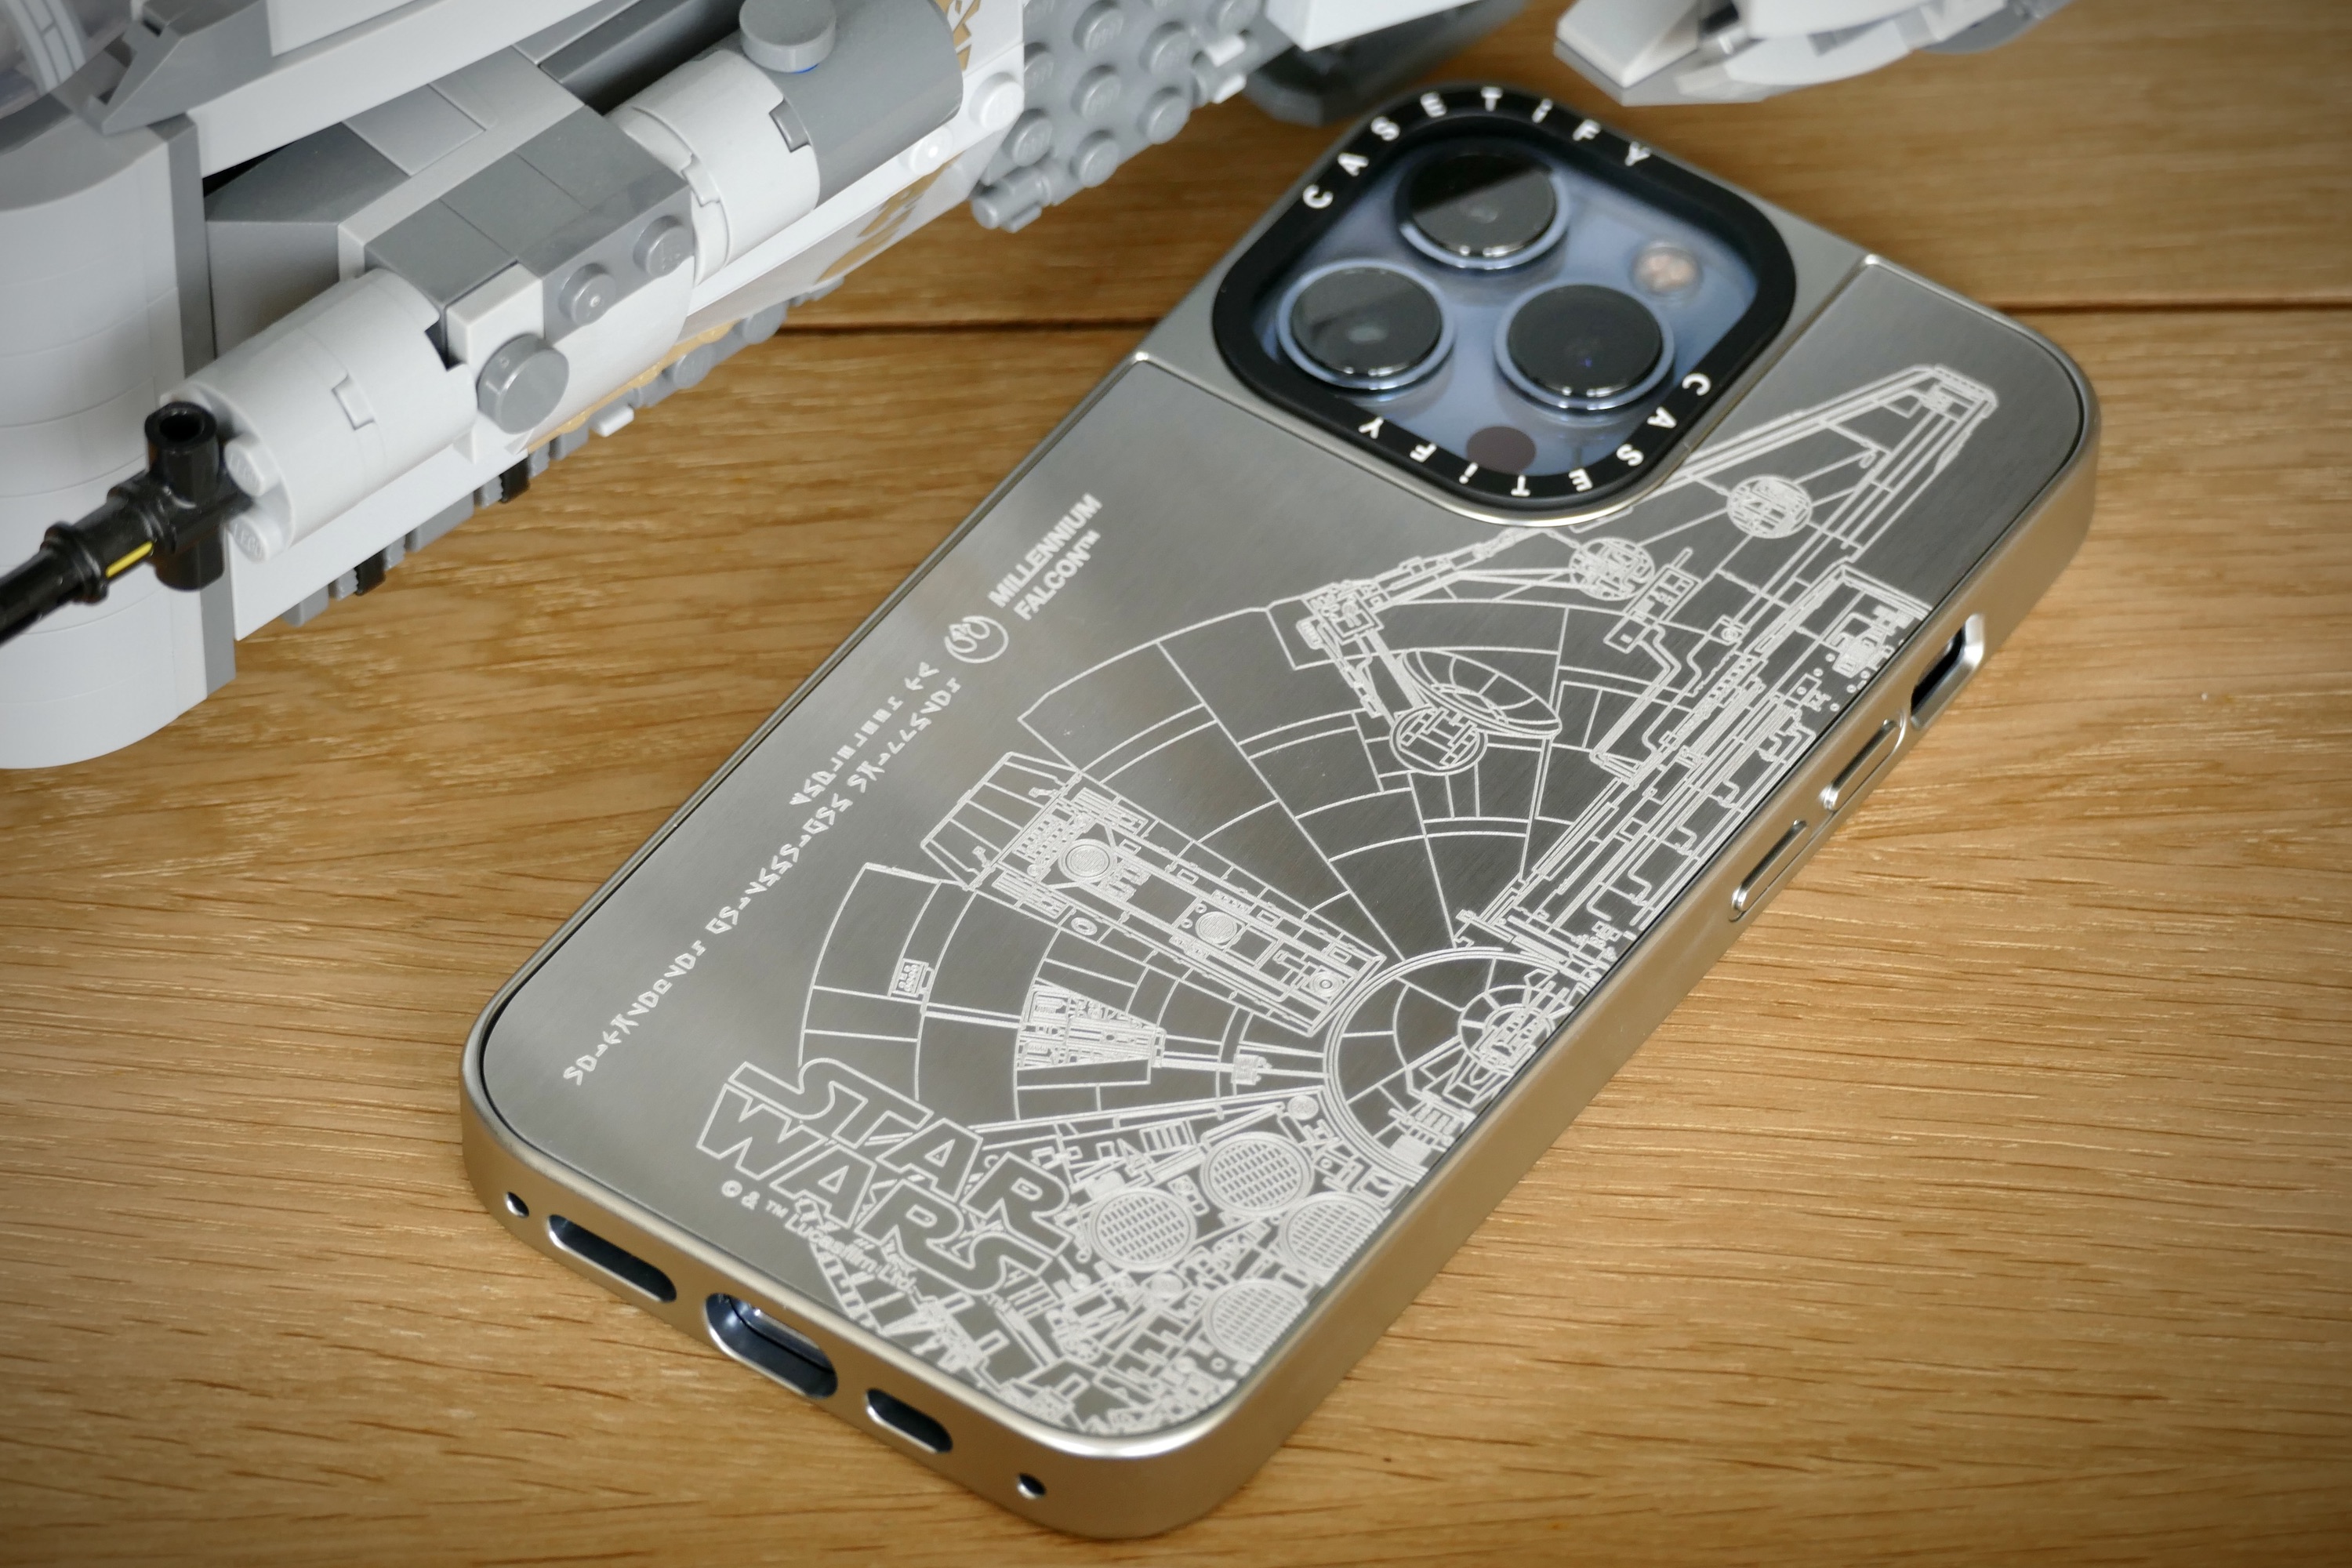 The back of Casetify's Millennium Falcon iPhone case.